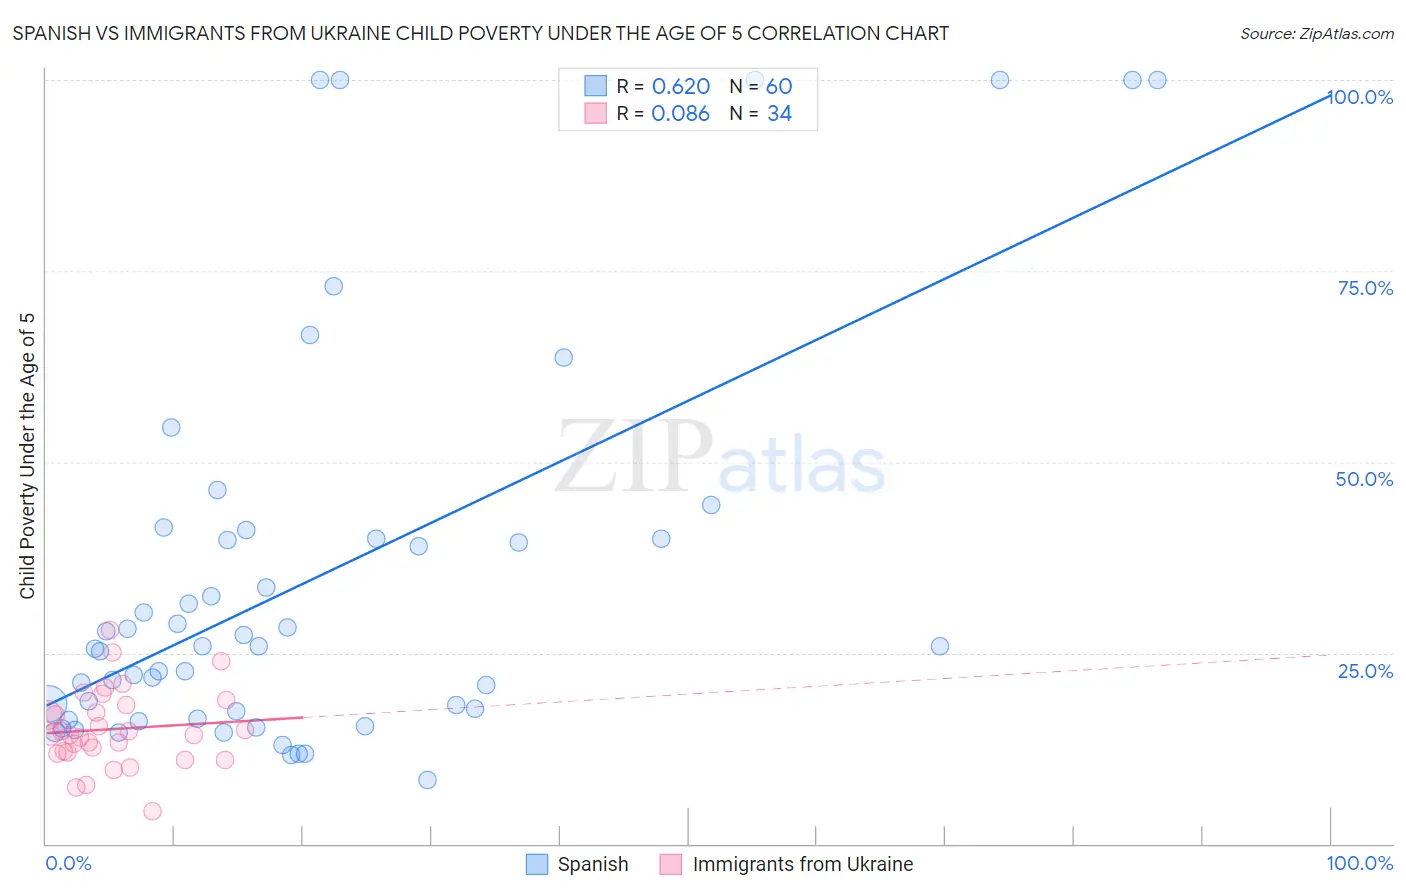 Spanish vs Immigrants from Ukraine Child Poverty Under the Age of 5